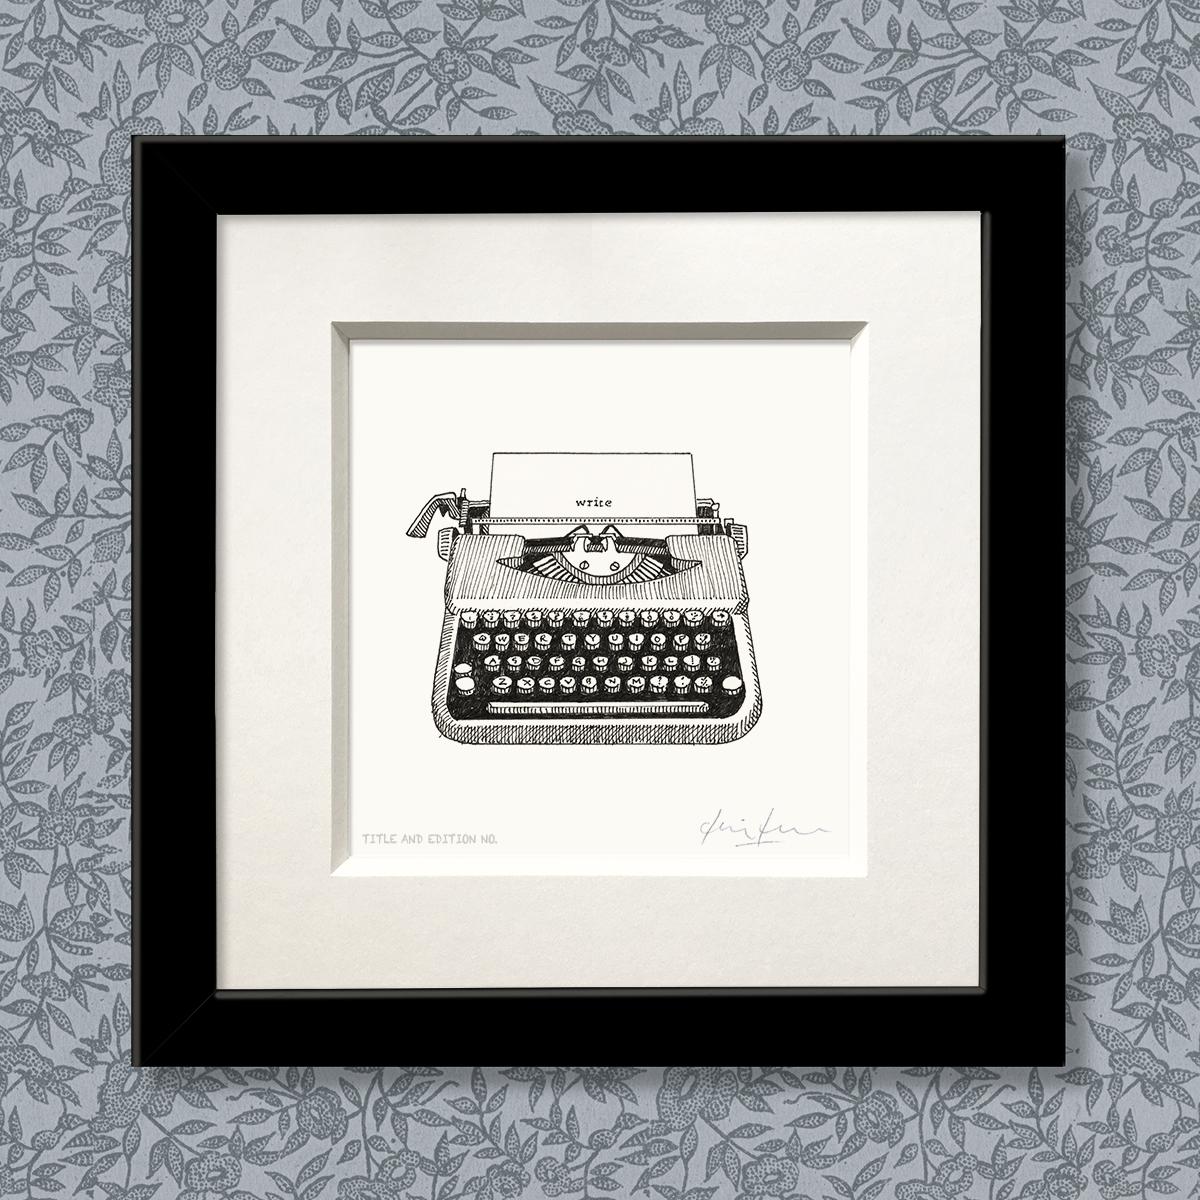 Limited edition print from pen and ink drawing of an old typewriter with the word 'write' in a black frame